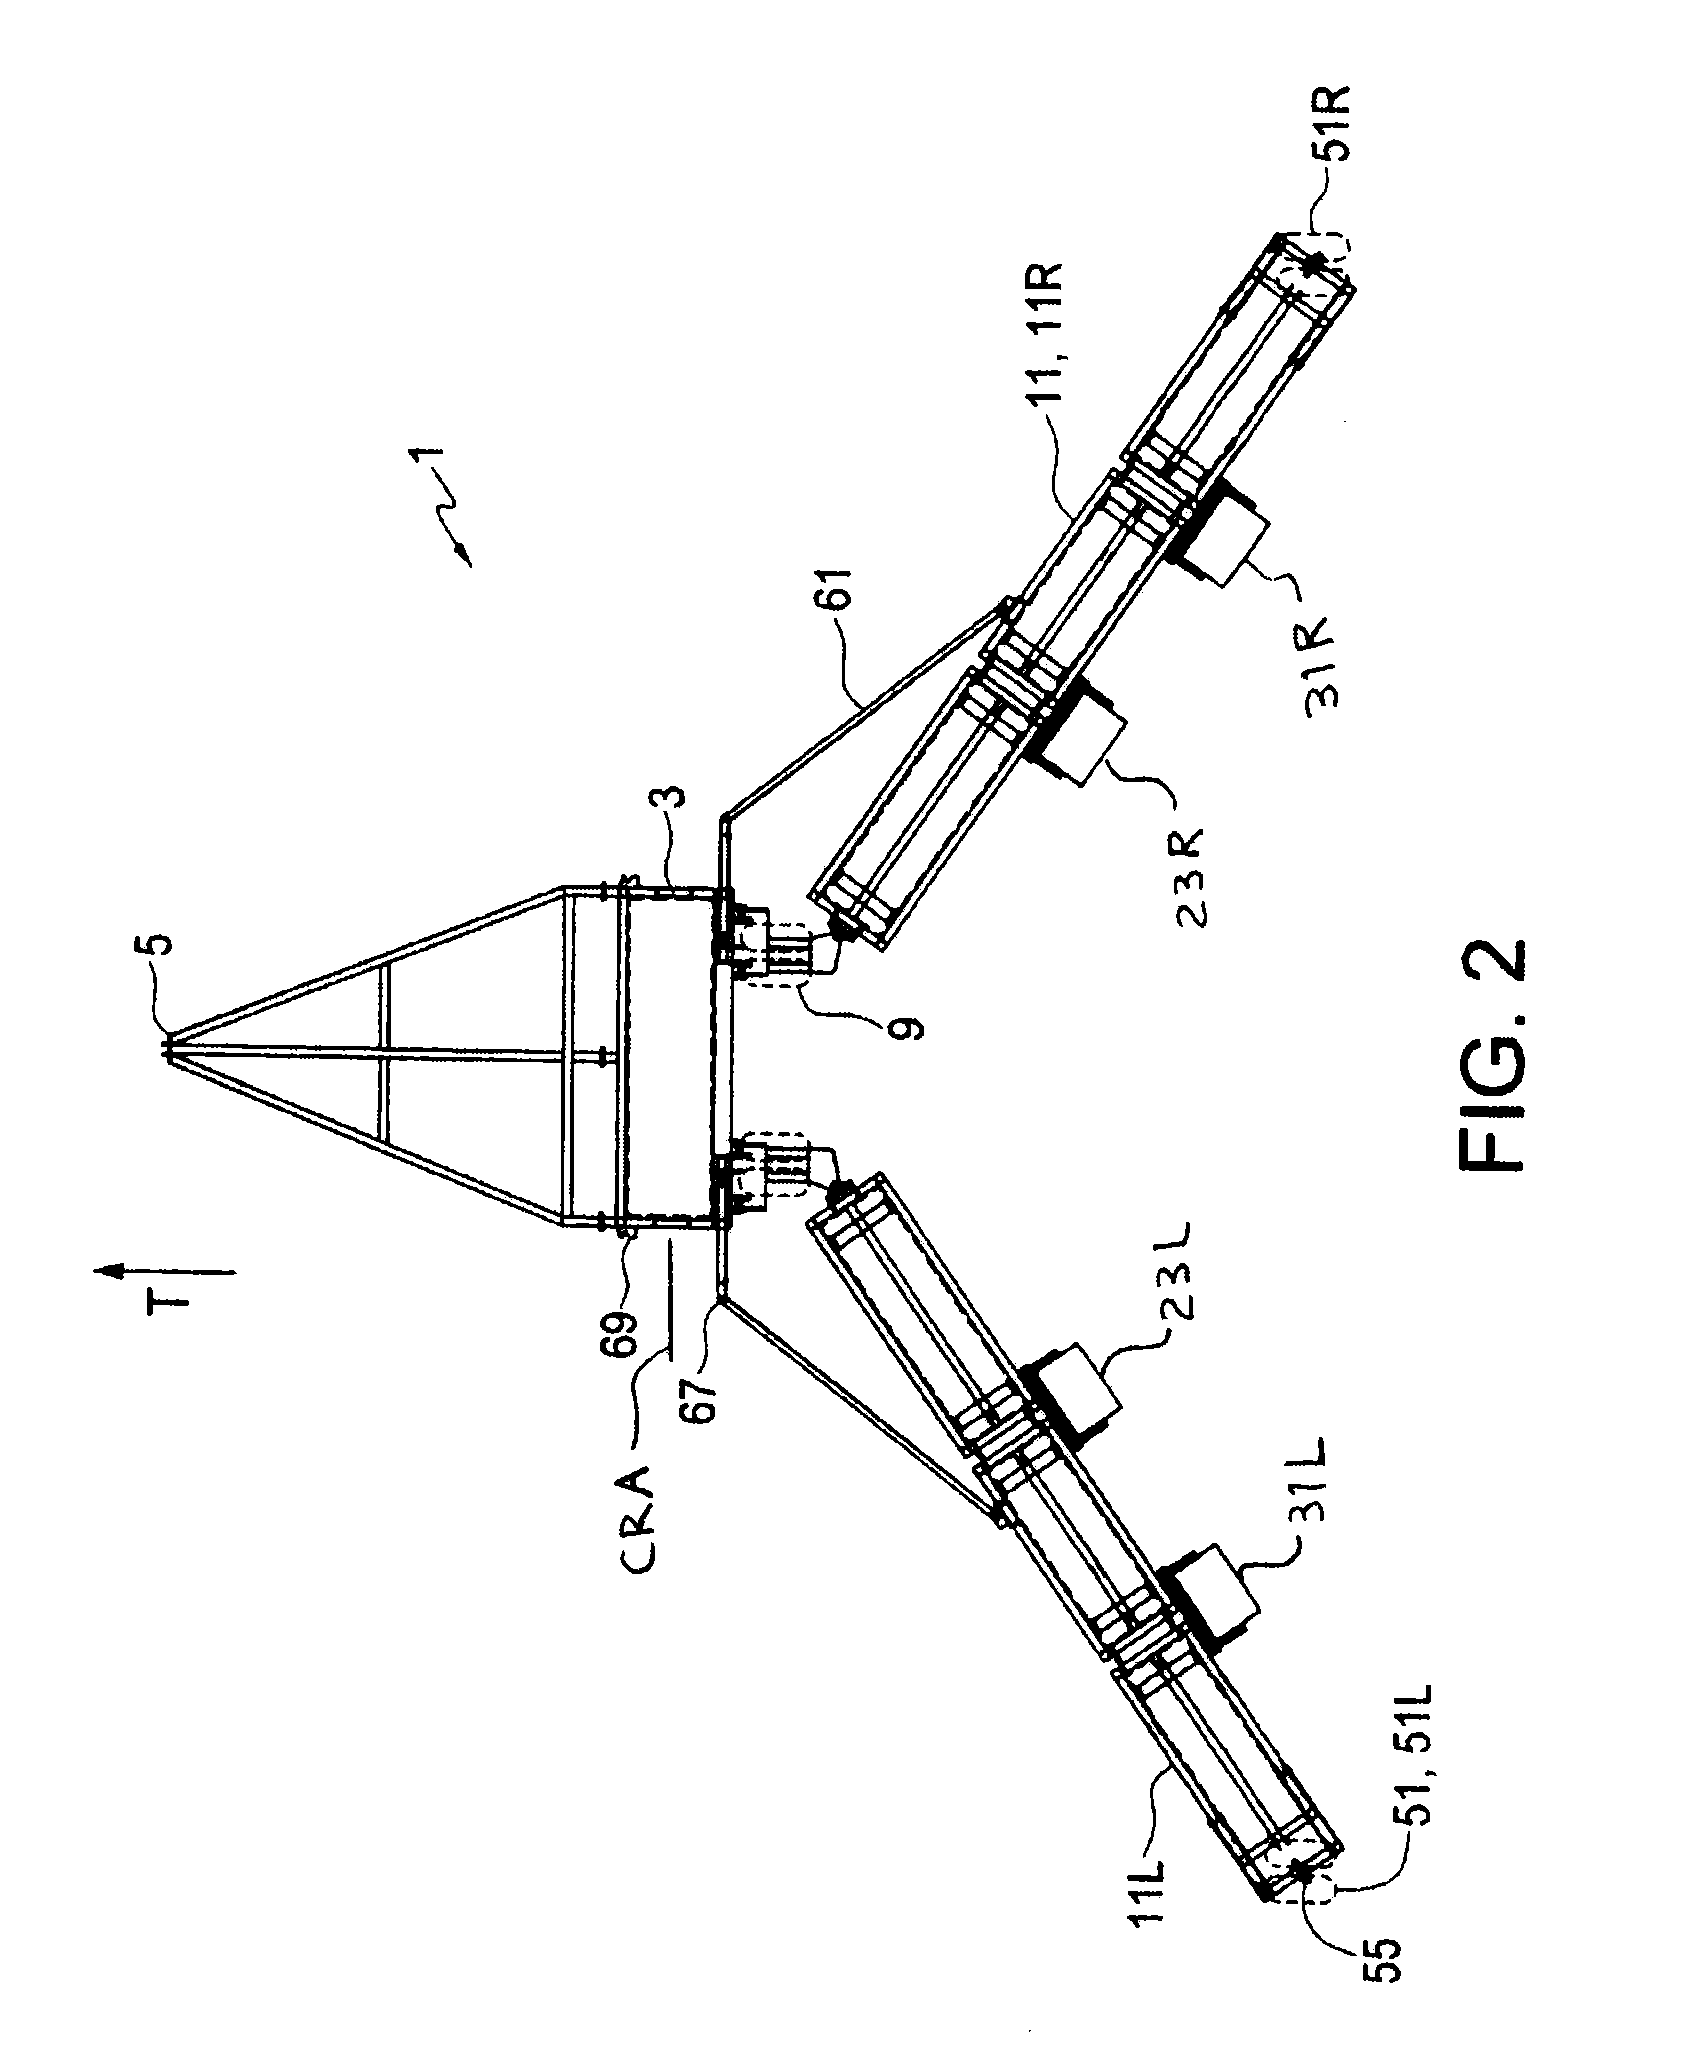 Folding land rolling implement